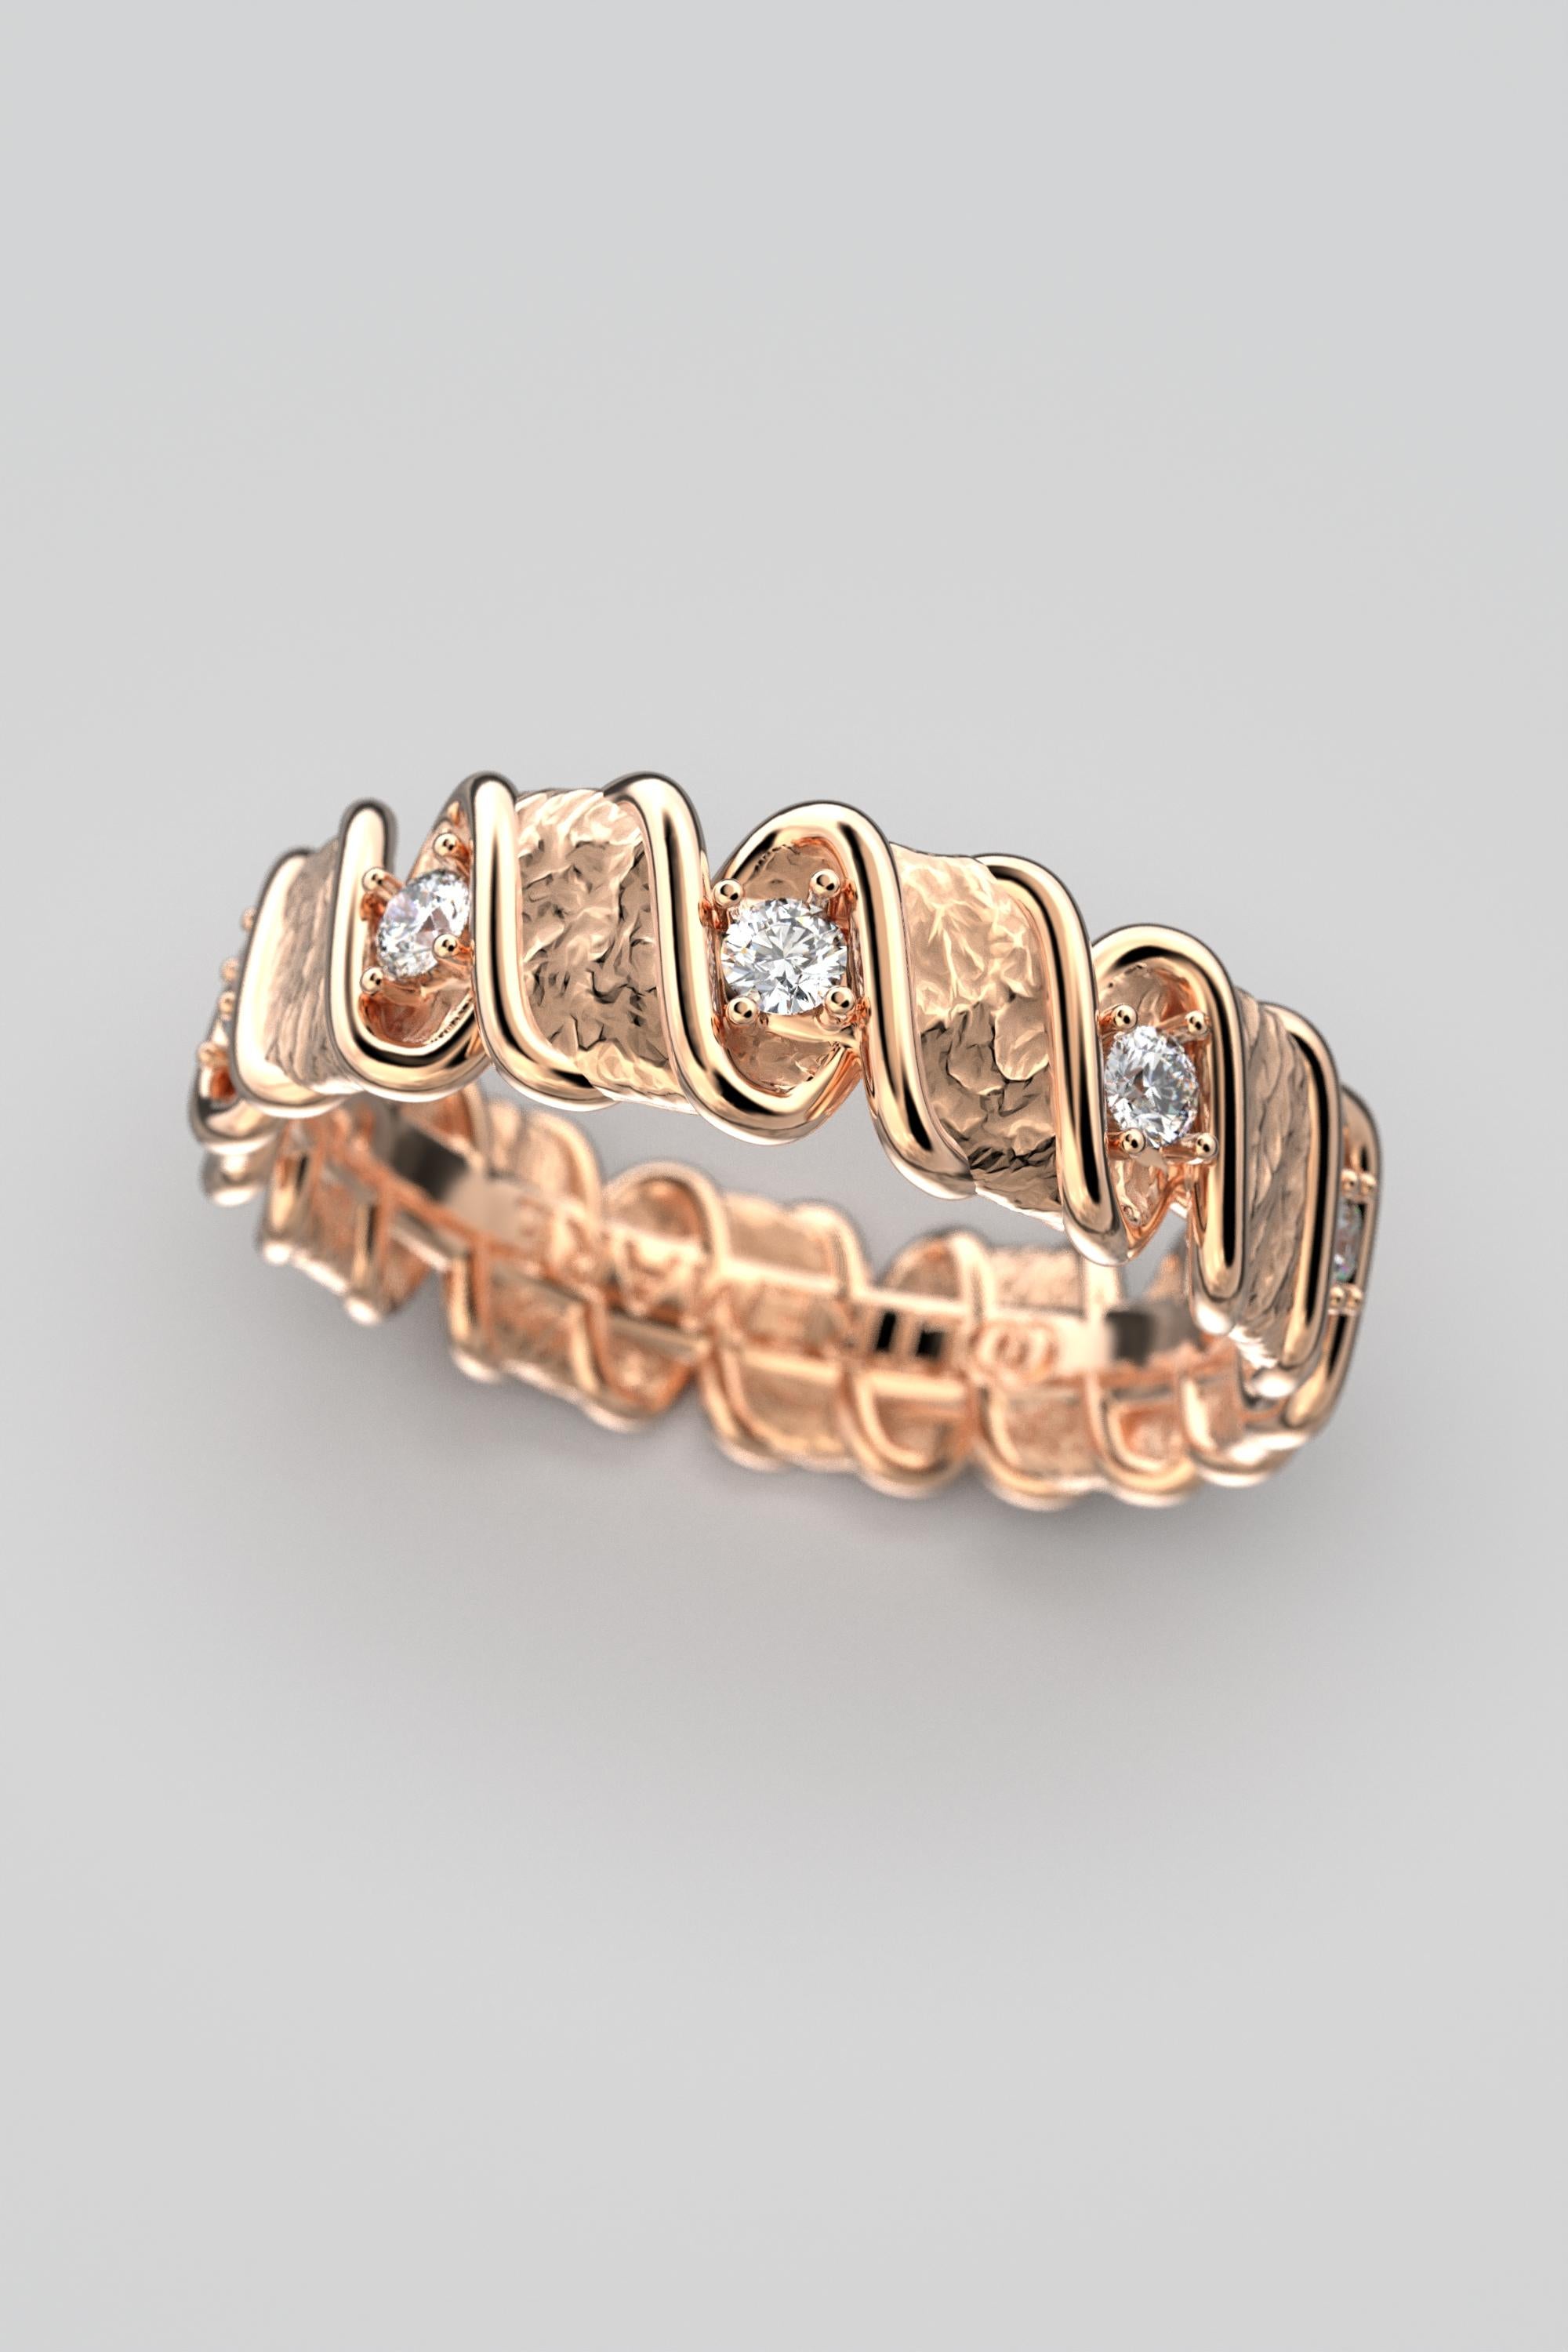 For Sale:  14k Italian Gold Eternity Band with Natural Diamonds  Oltremare Gioielli 8